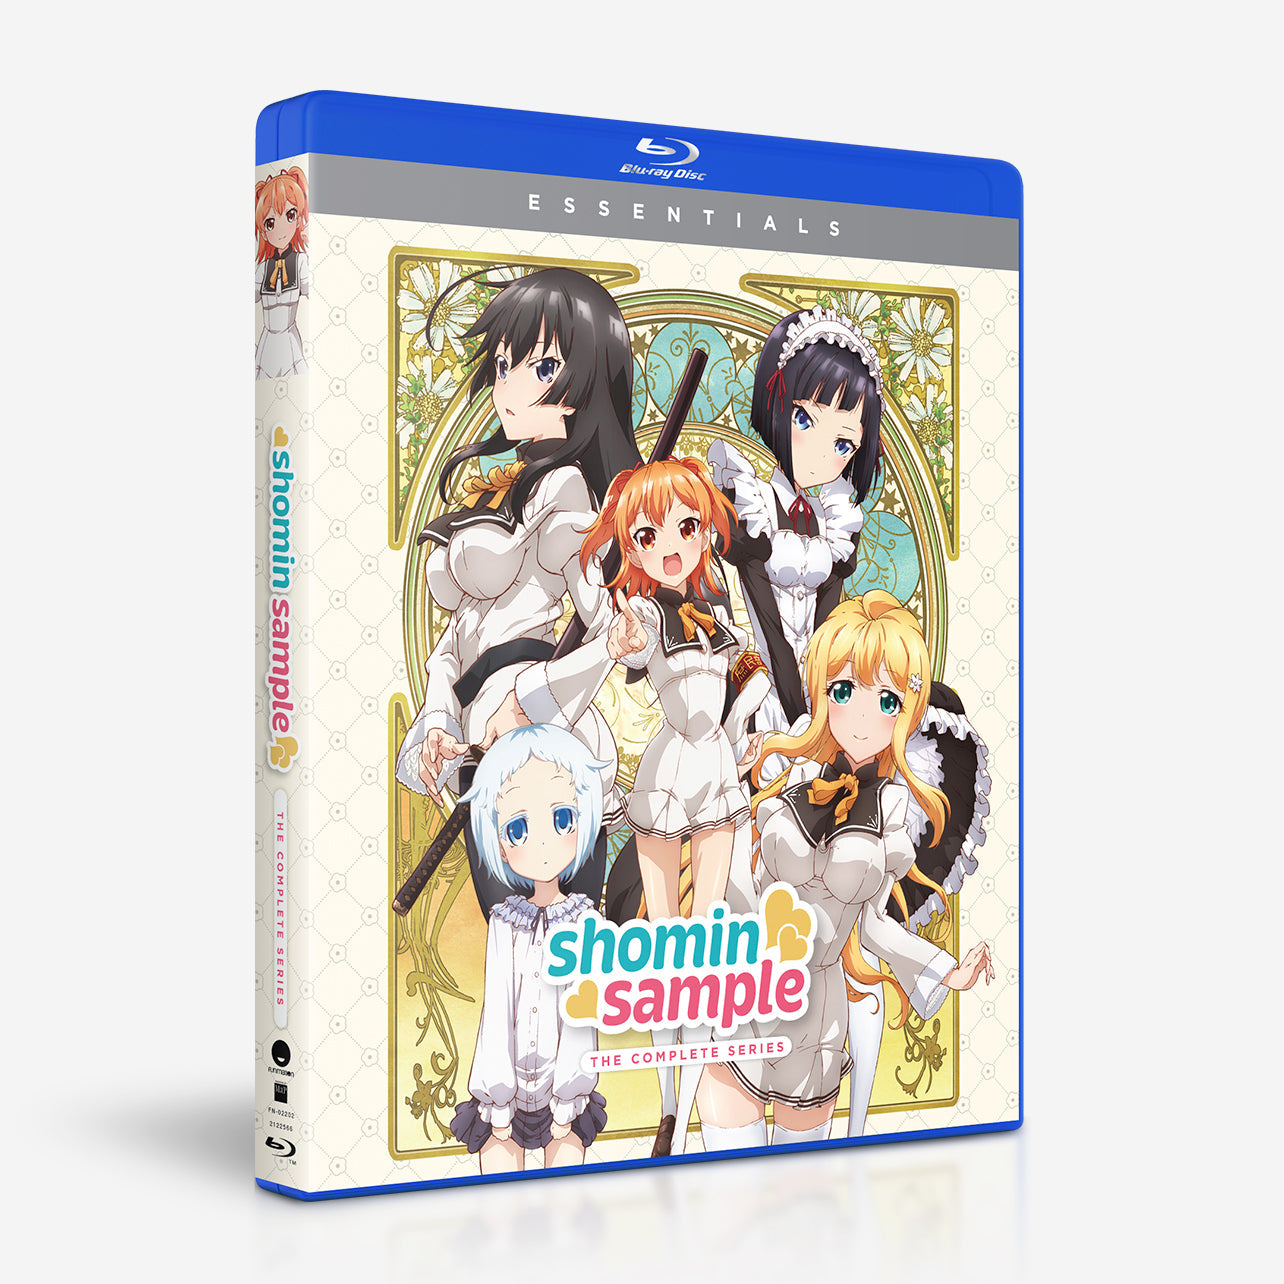 Shomin Sample - The Complete Series - Essentials - Blu-ray image count 0